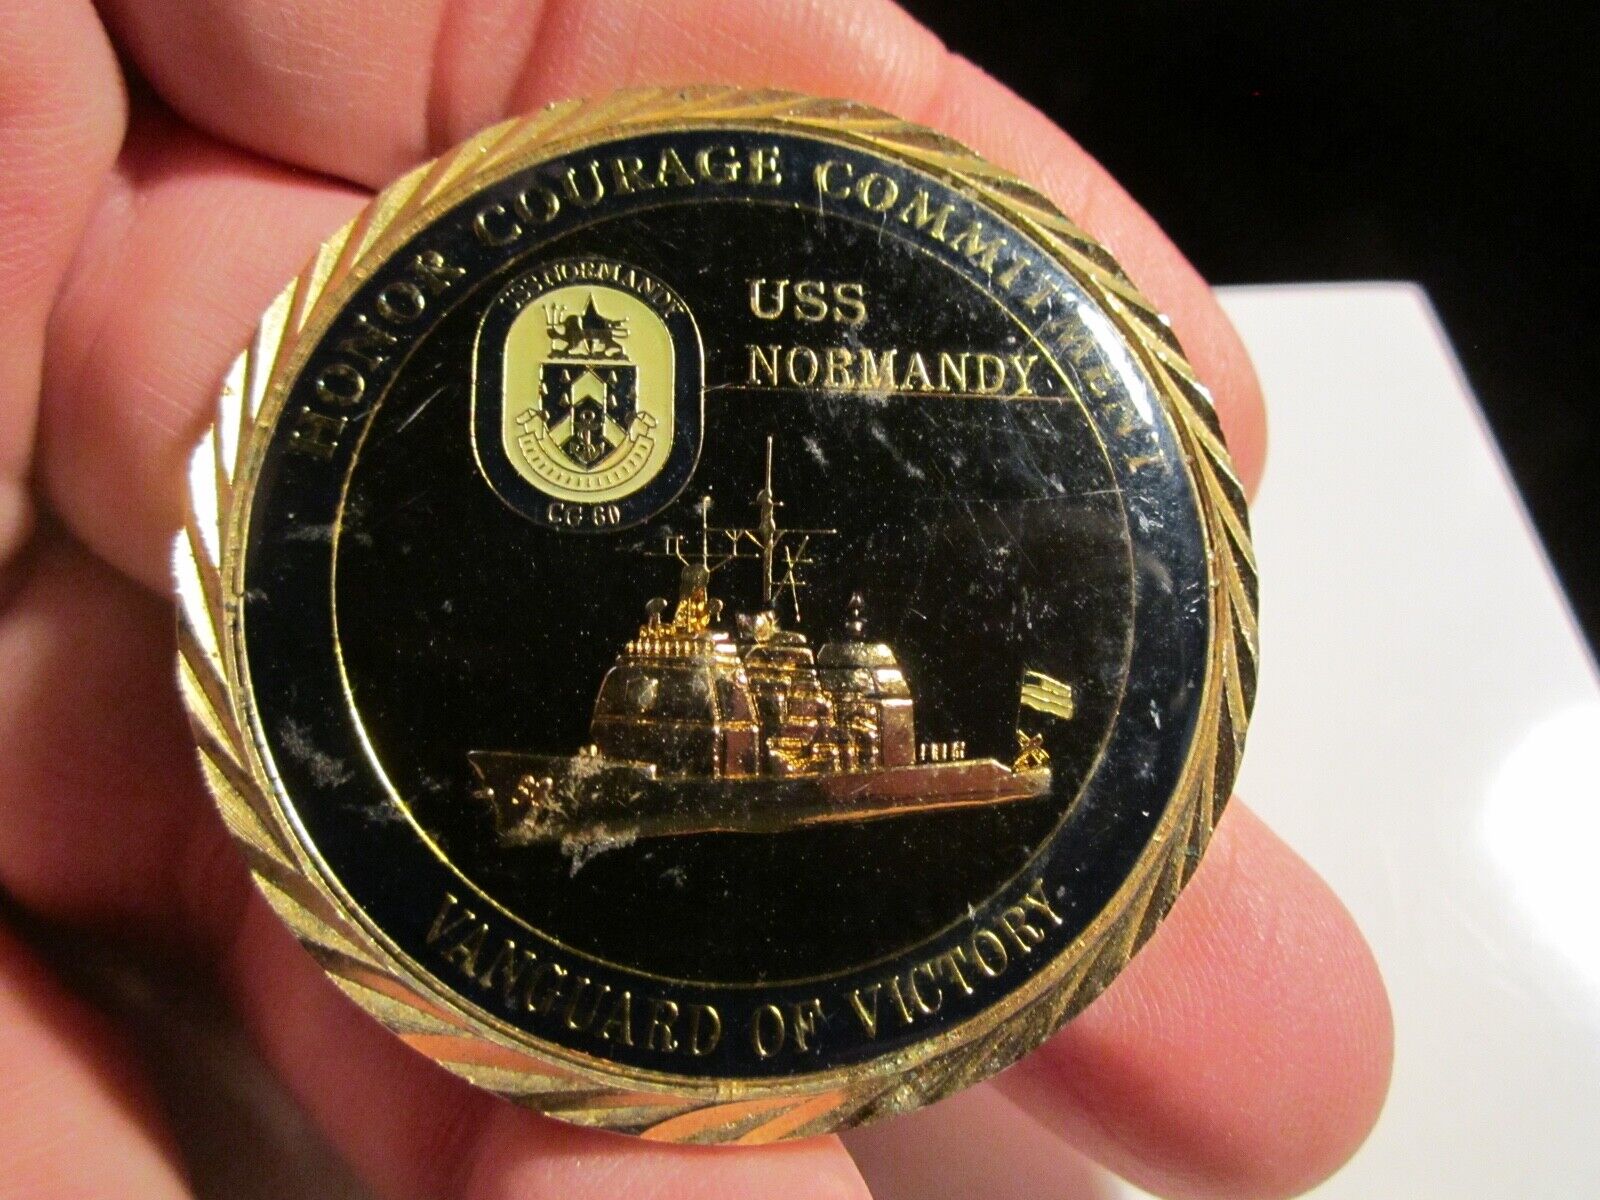 U.S.S. NORMANDY CHALLENGE COIN VANGUARD OF VICTORY COMMAND MASTER CHIEF 2\